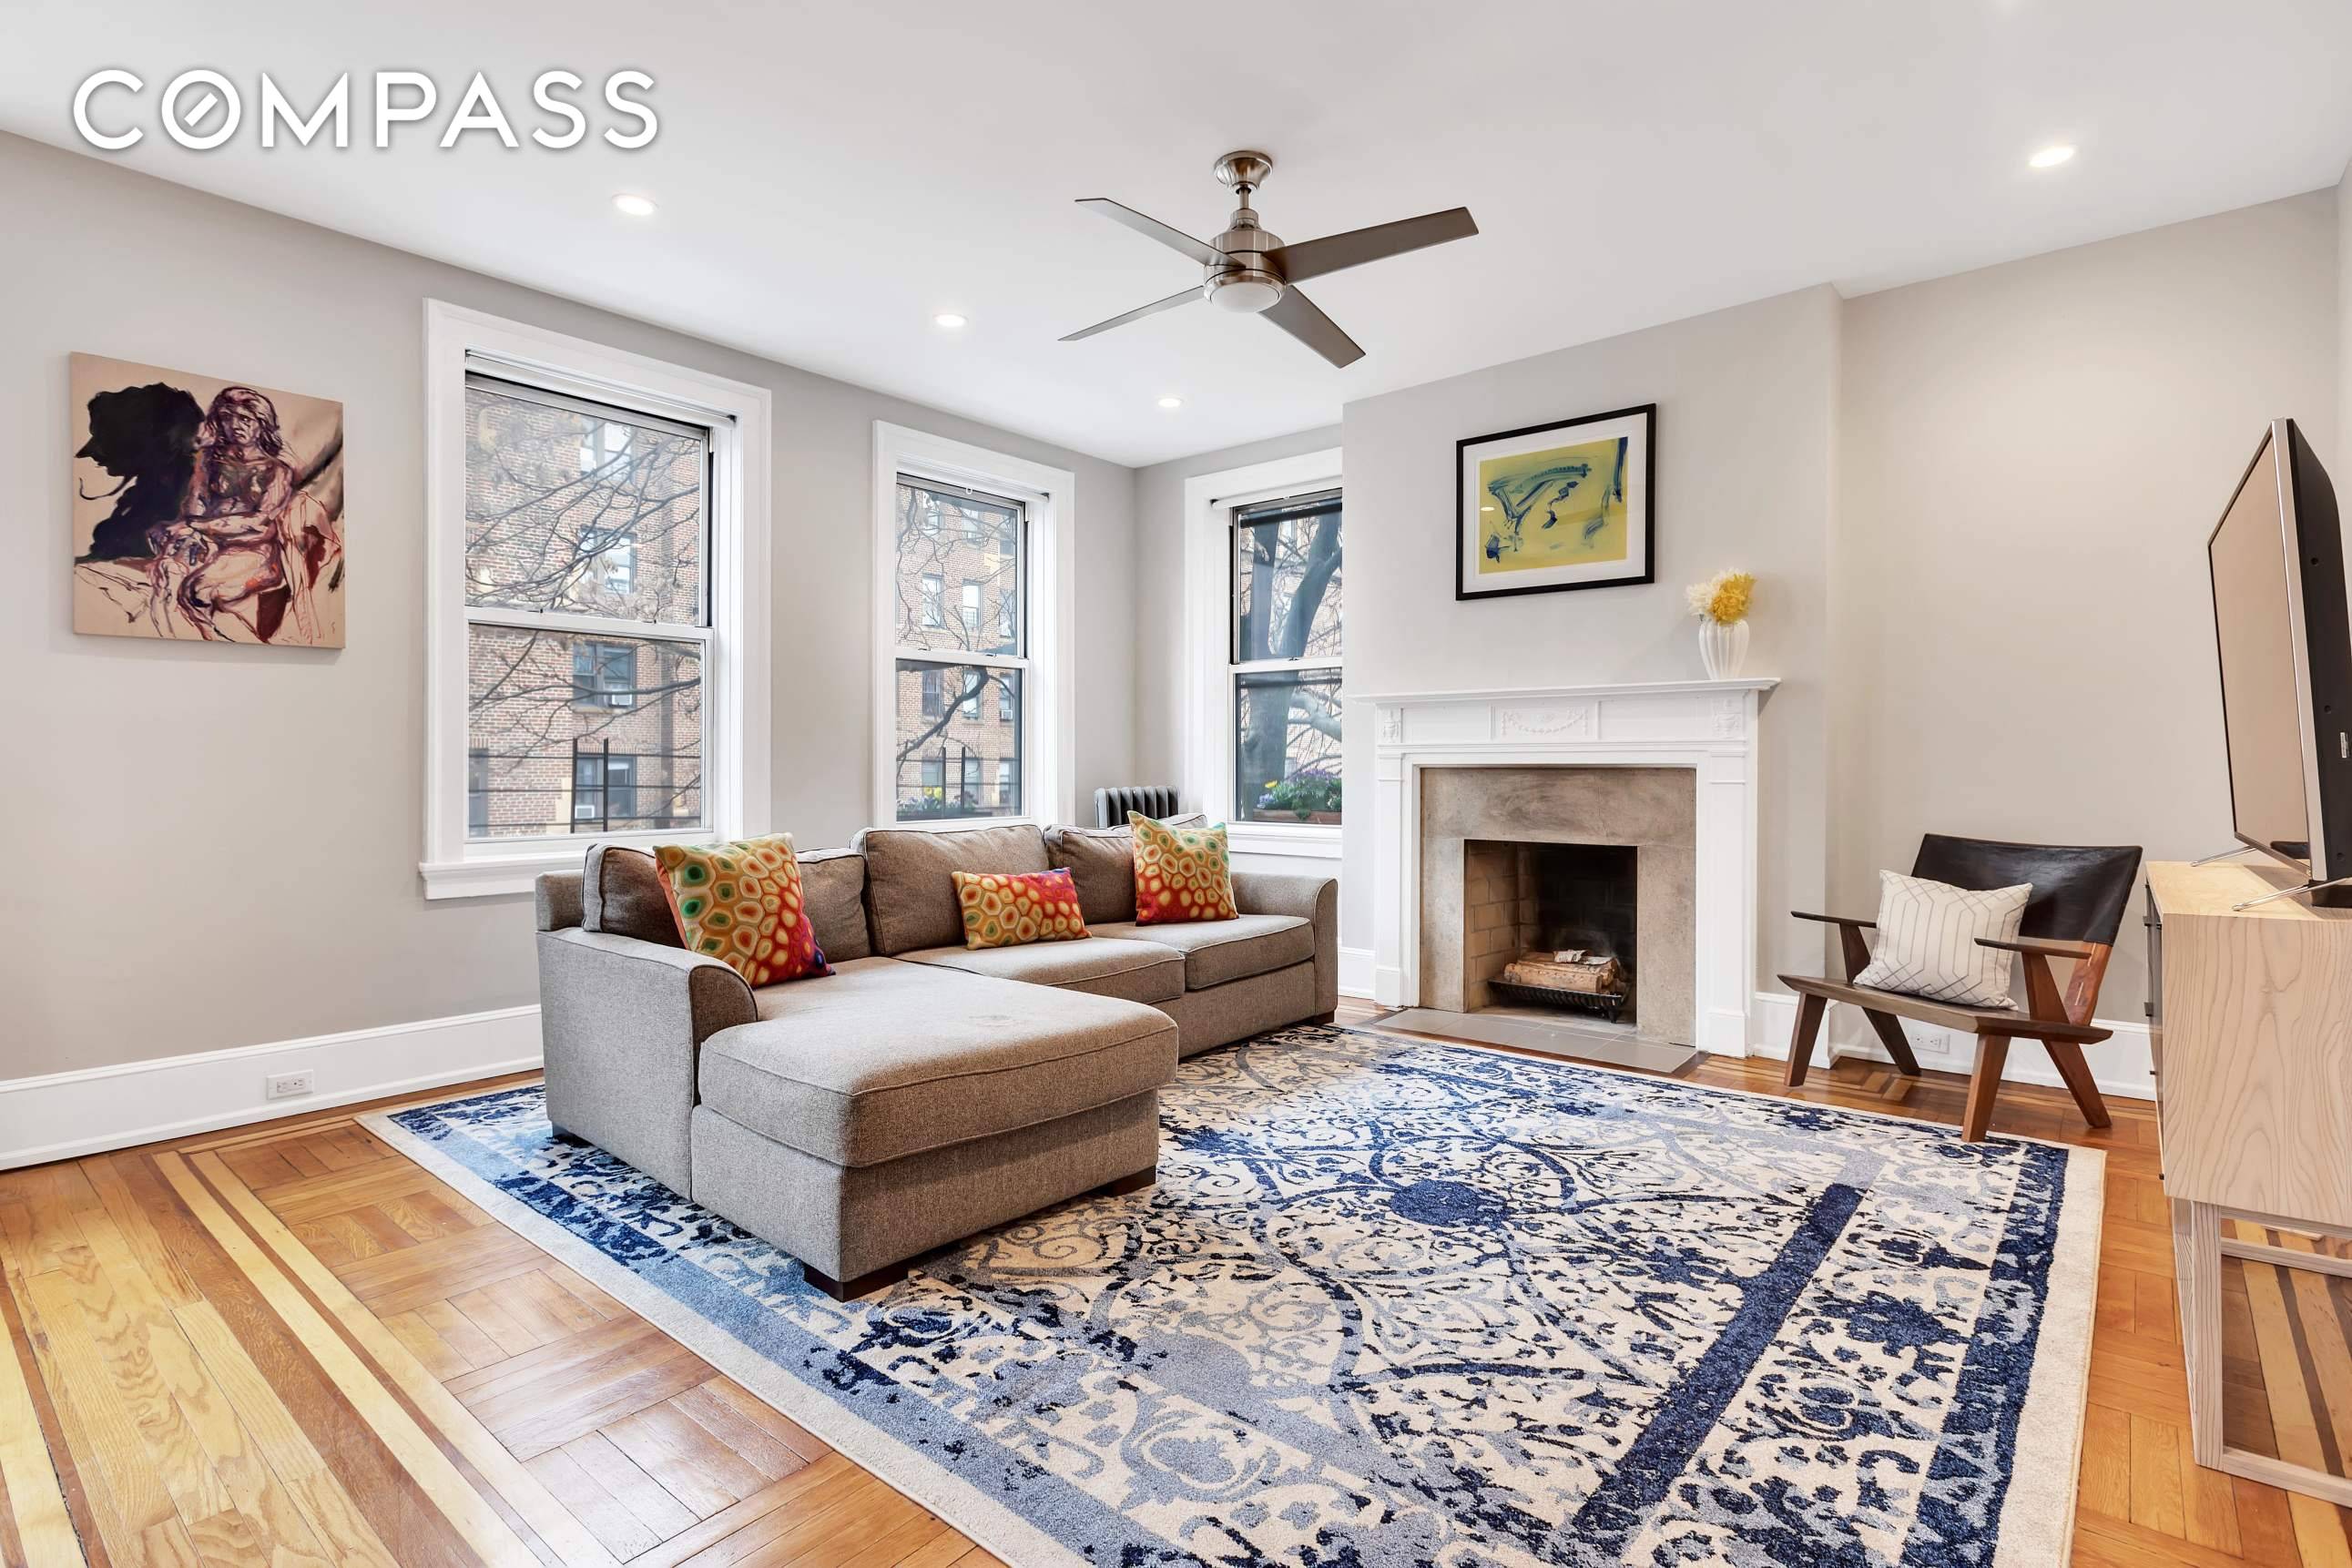 Modern design meets historic Jackson Heights in this large, light filled, pre war two bedroom, one bathroom co op.